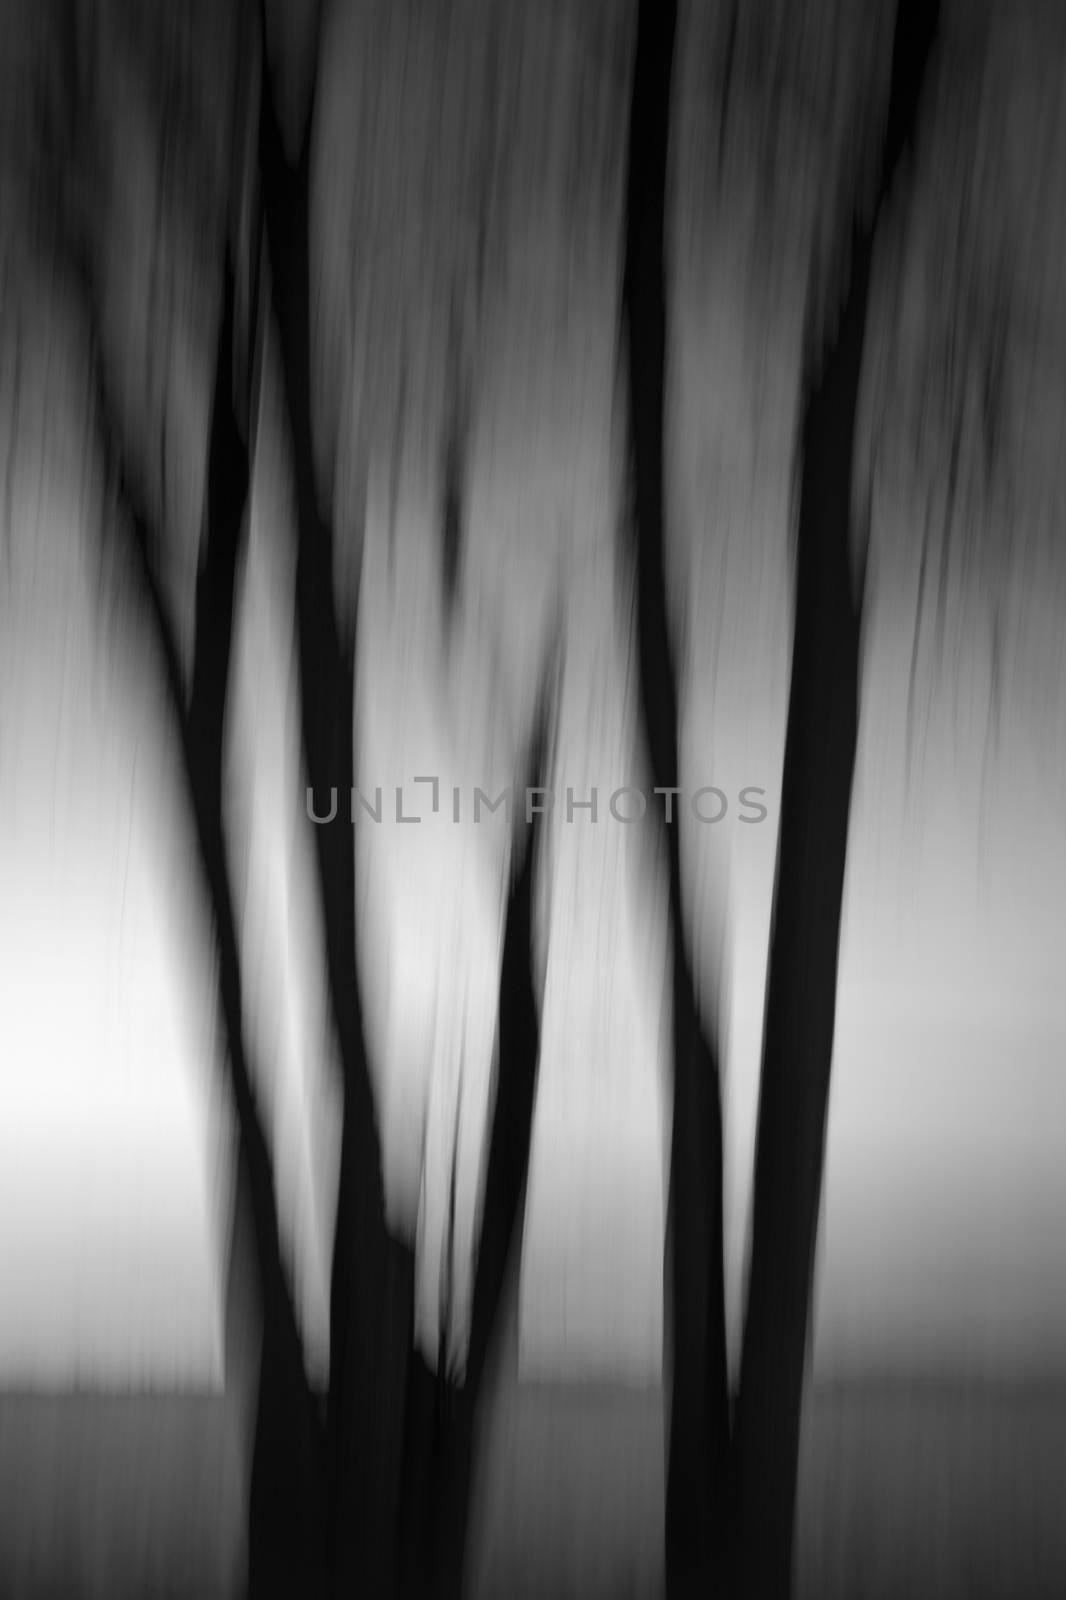 Abstract creative black and whitre image of trees in motion blur by ankihoglund